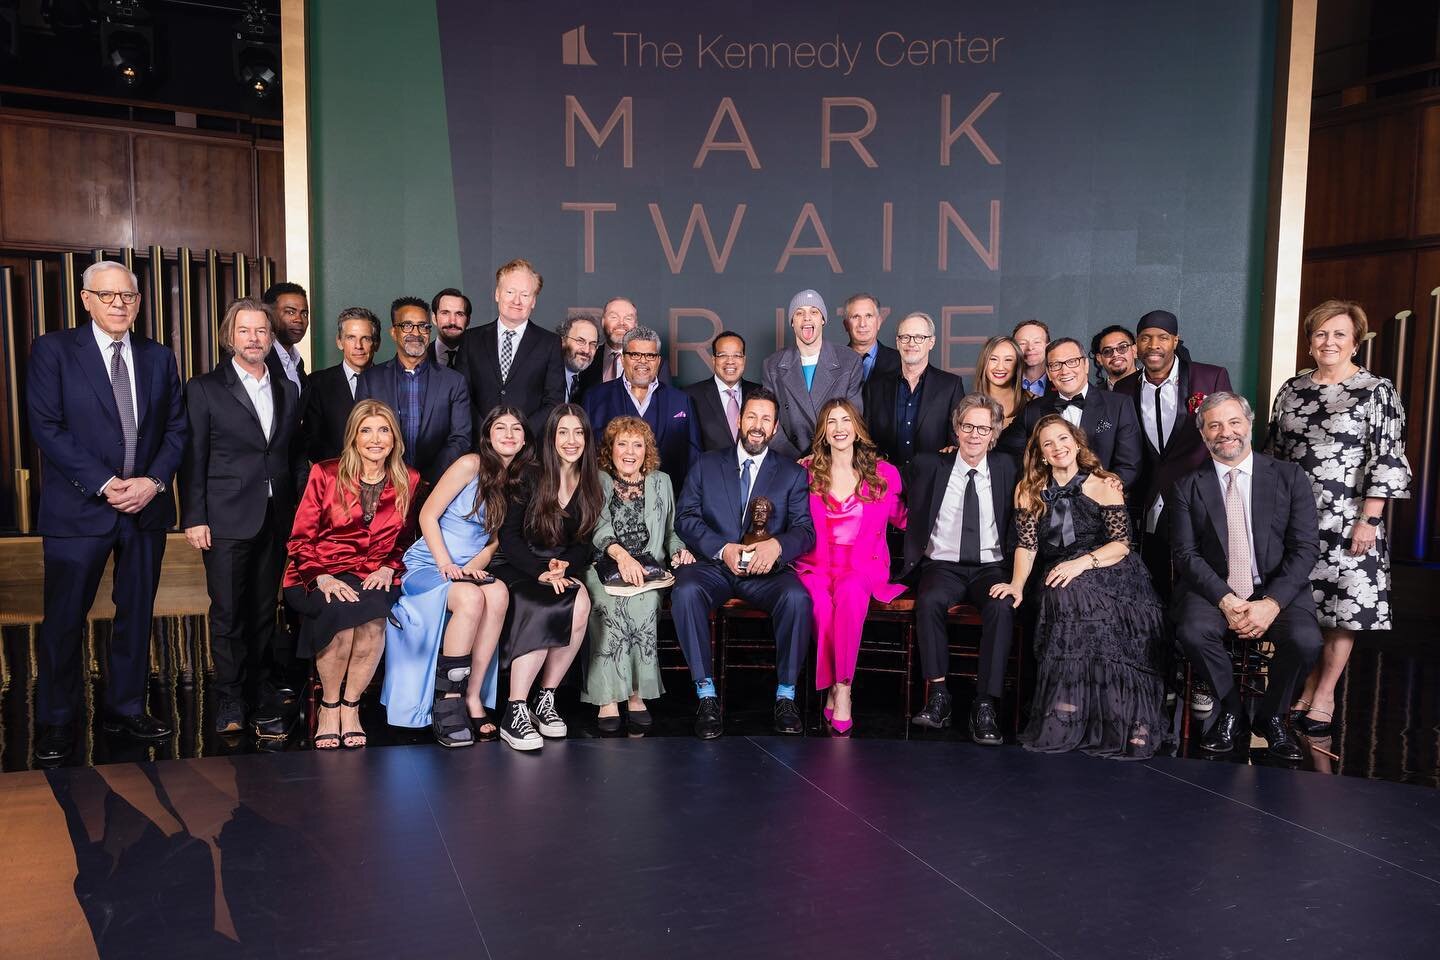 TONIGHT! Watch an incredible salute to iconic comedian @adamsandler. 

The 2023 #MarkTwainPrize celebration at the @KennedyCenter airs March 26 at 8 p.m. ET on @cnn 📺